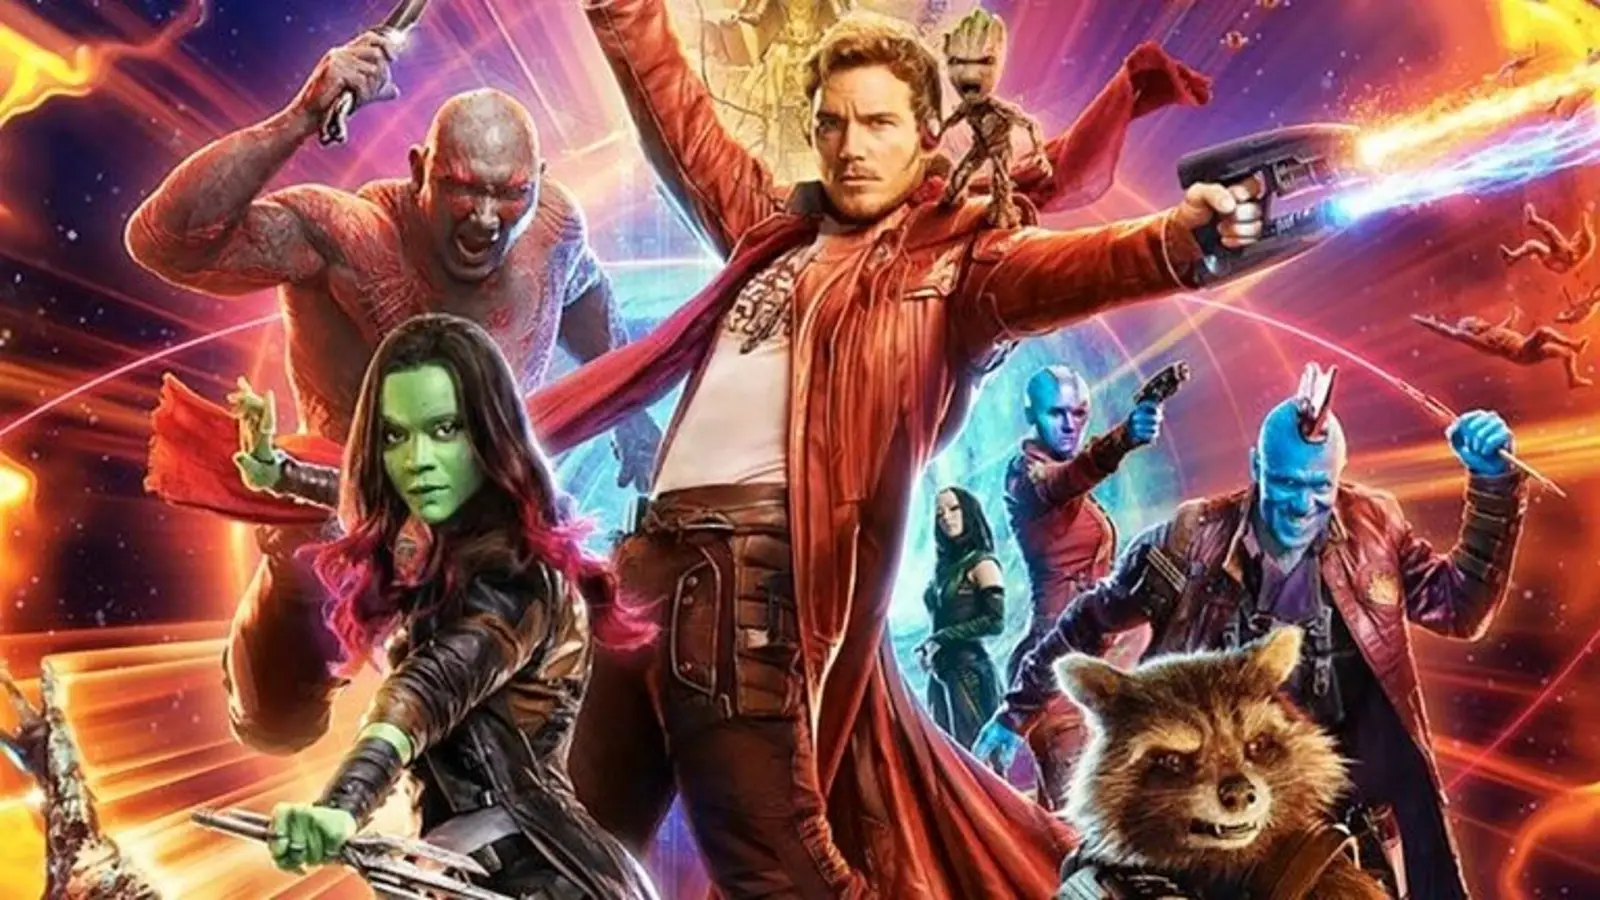 GOTG Vol. 3 is set to be released early in 2023